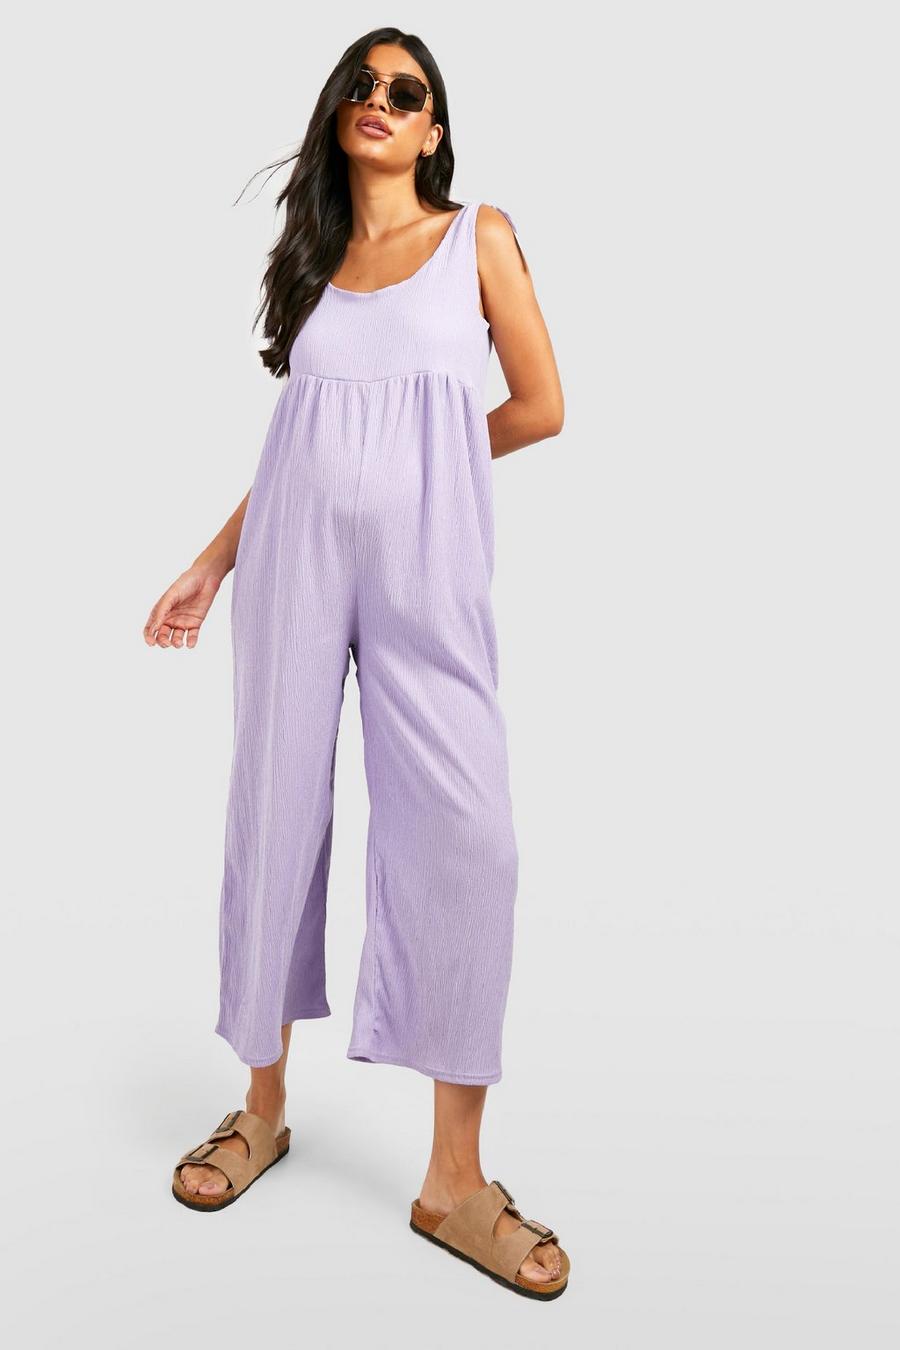 ASOS EDITION cross front jumpsuit with tie